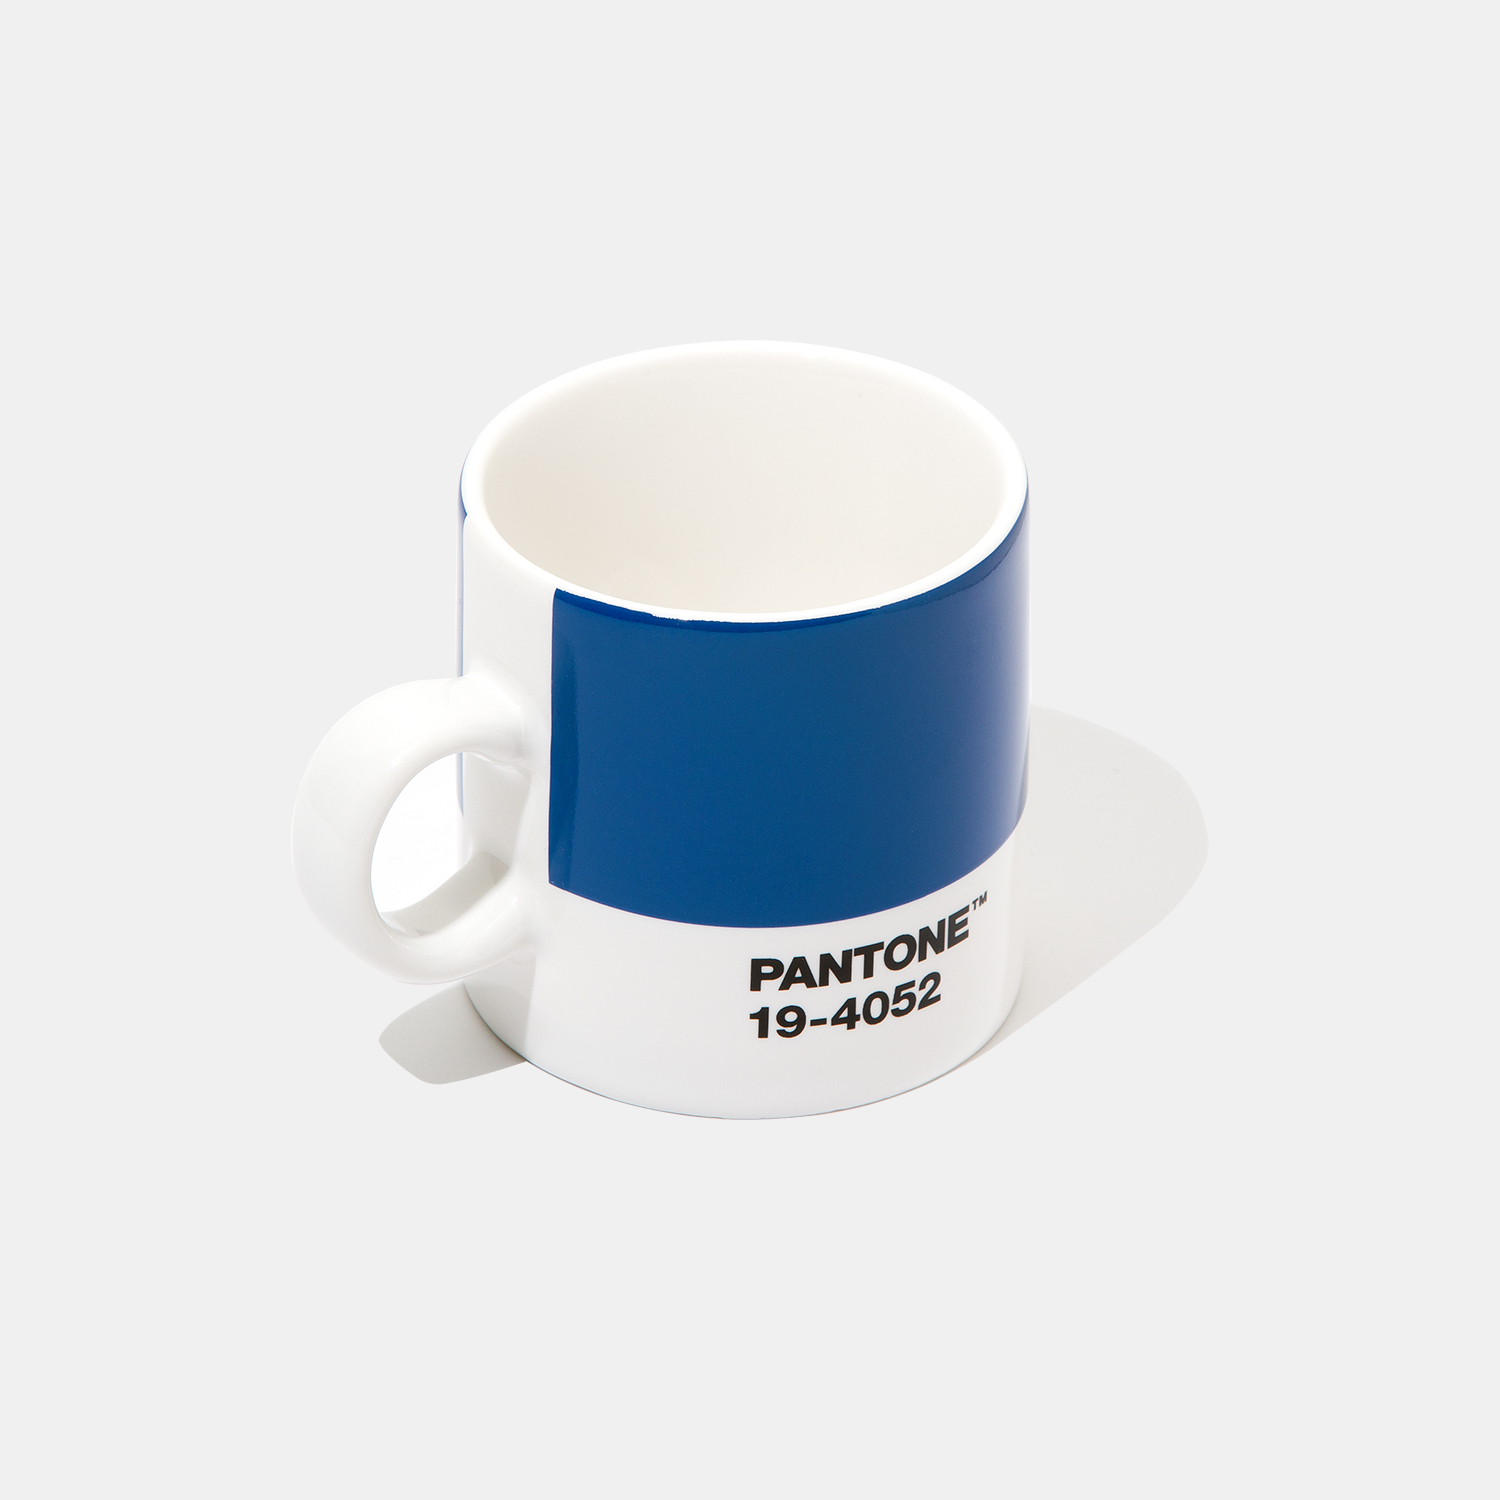 Pantone Limited Edition Espresso Cup, Pantone Color of the Year 2020 Classic Blue - View 1